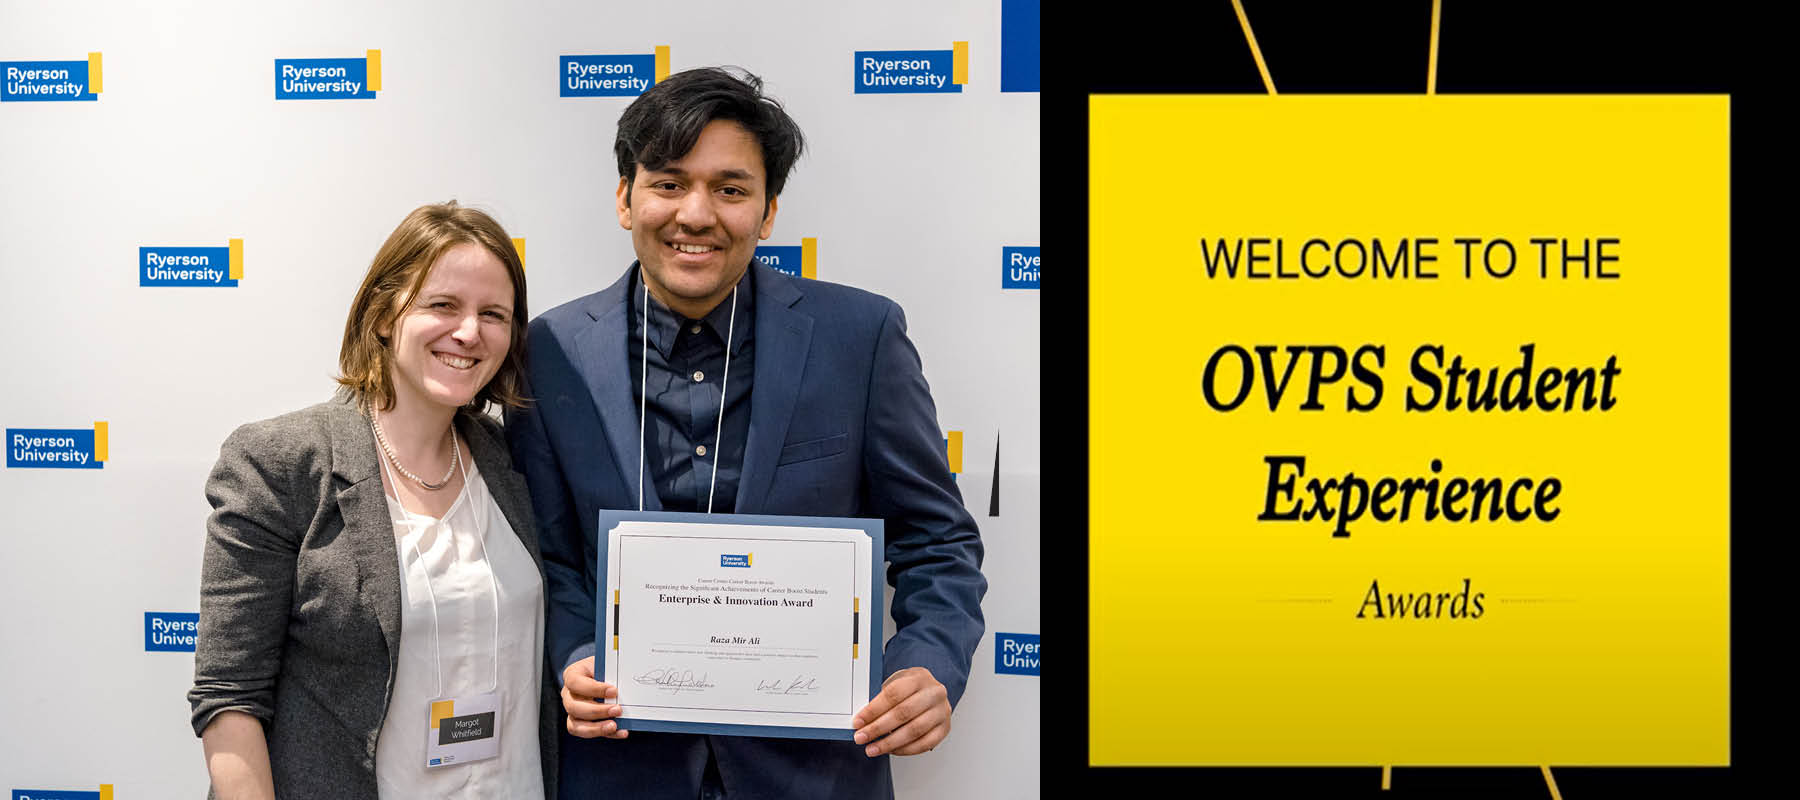 Mir Ali, undergraduate student Career Boost winner holding up award beside staff, Whitfield, smiling next to OVPS student experience award signage.